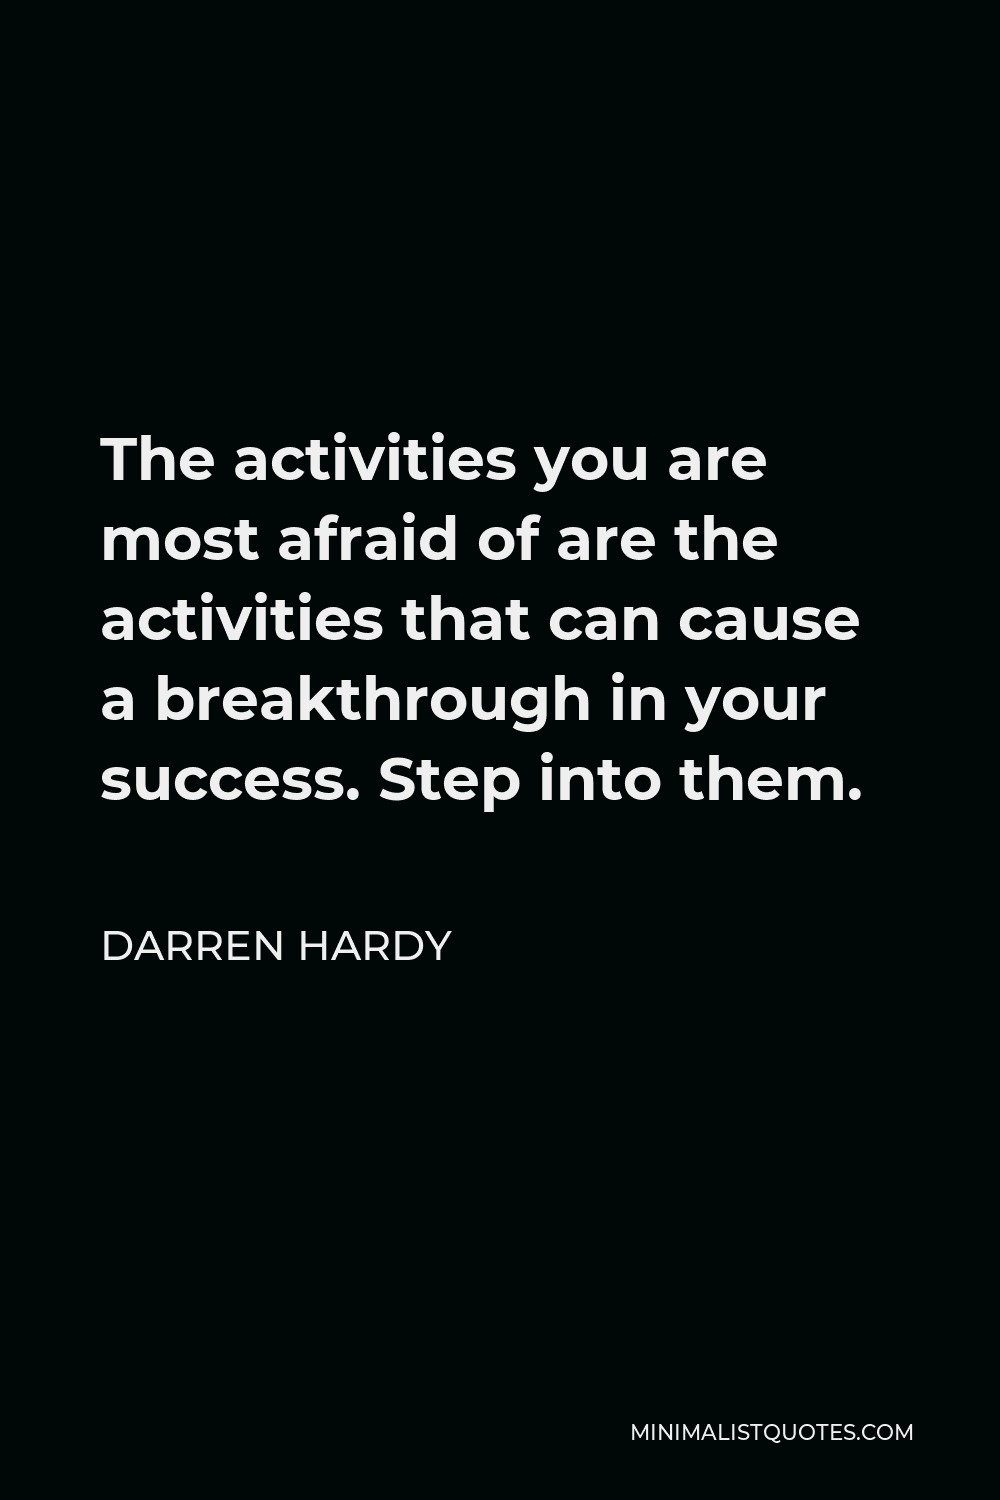 Darren Hardy Quote - The activities you are most afraid of are the activities that can cause a breakthrough in your success. Step into them.